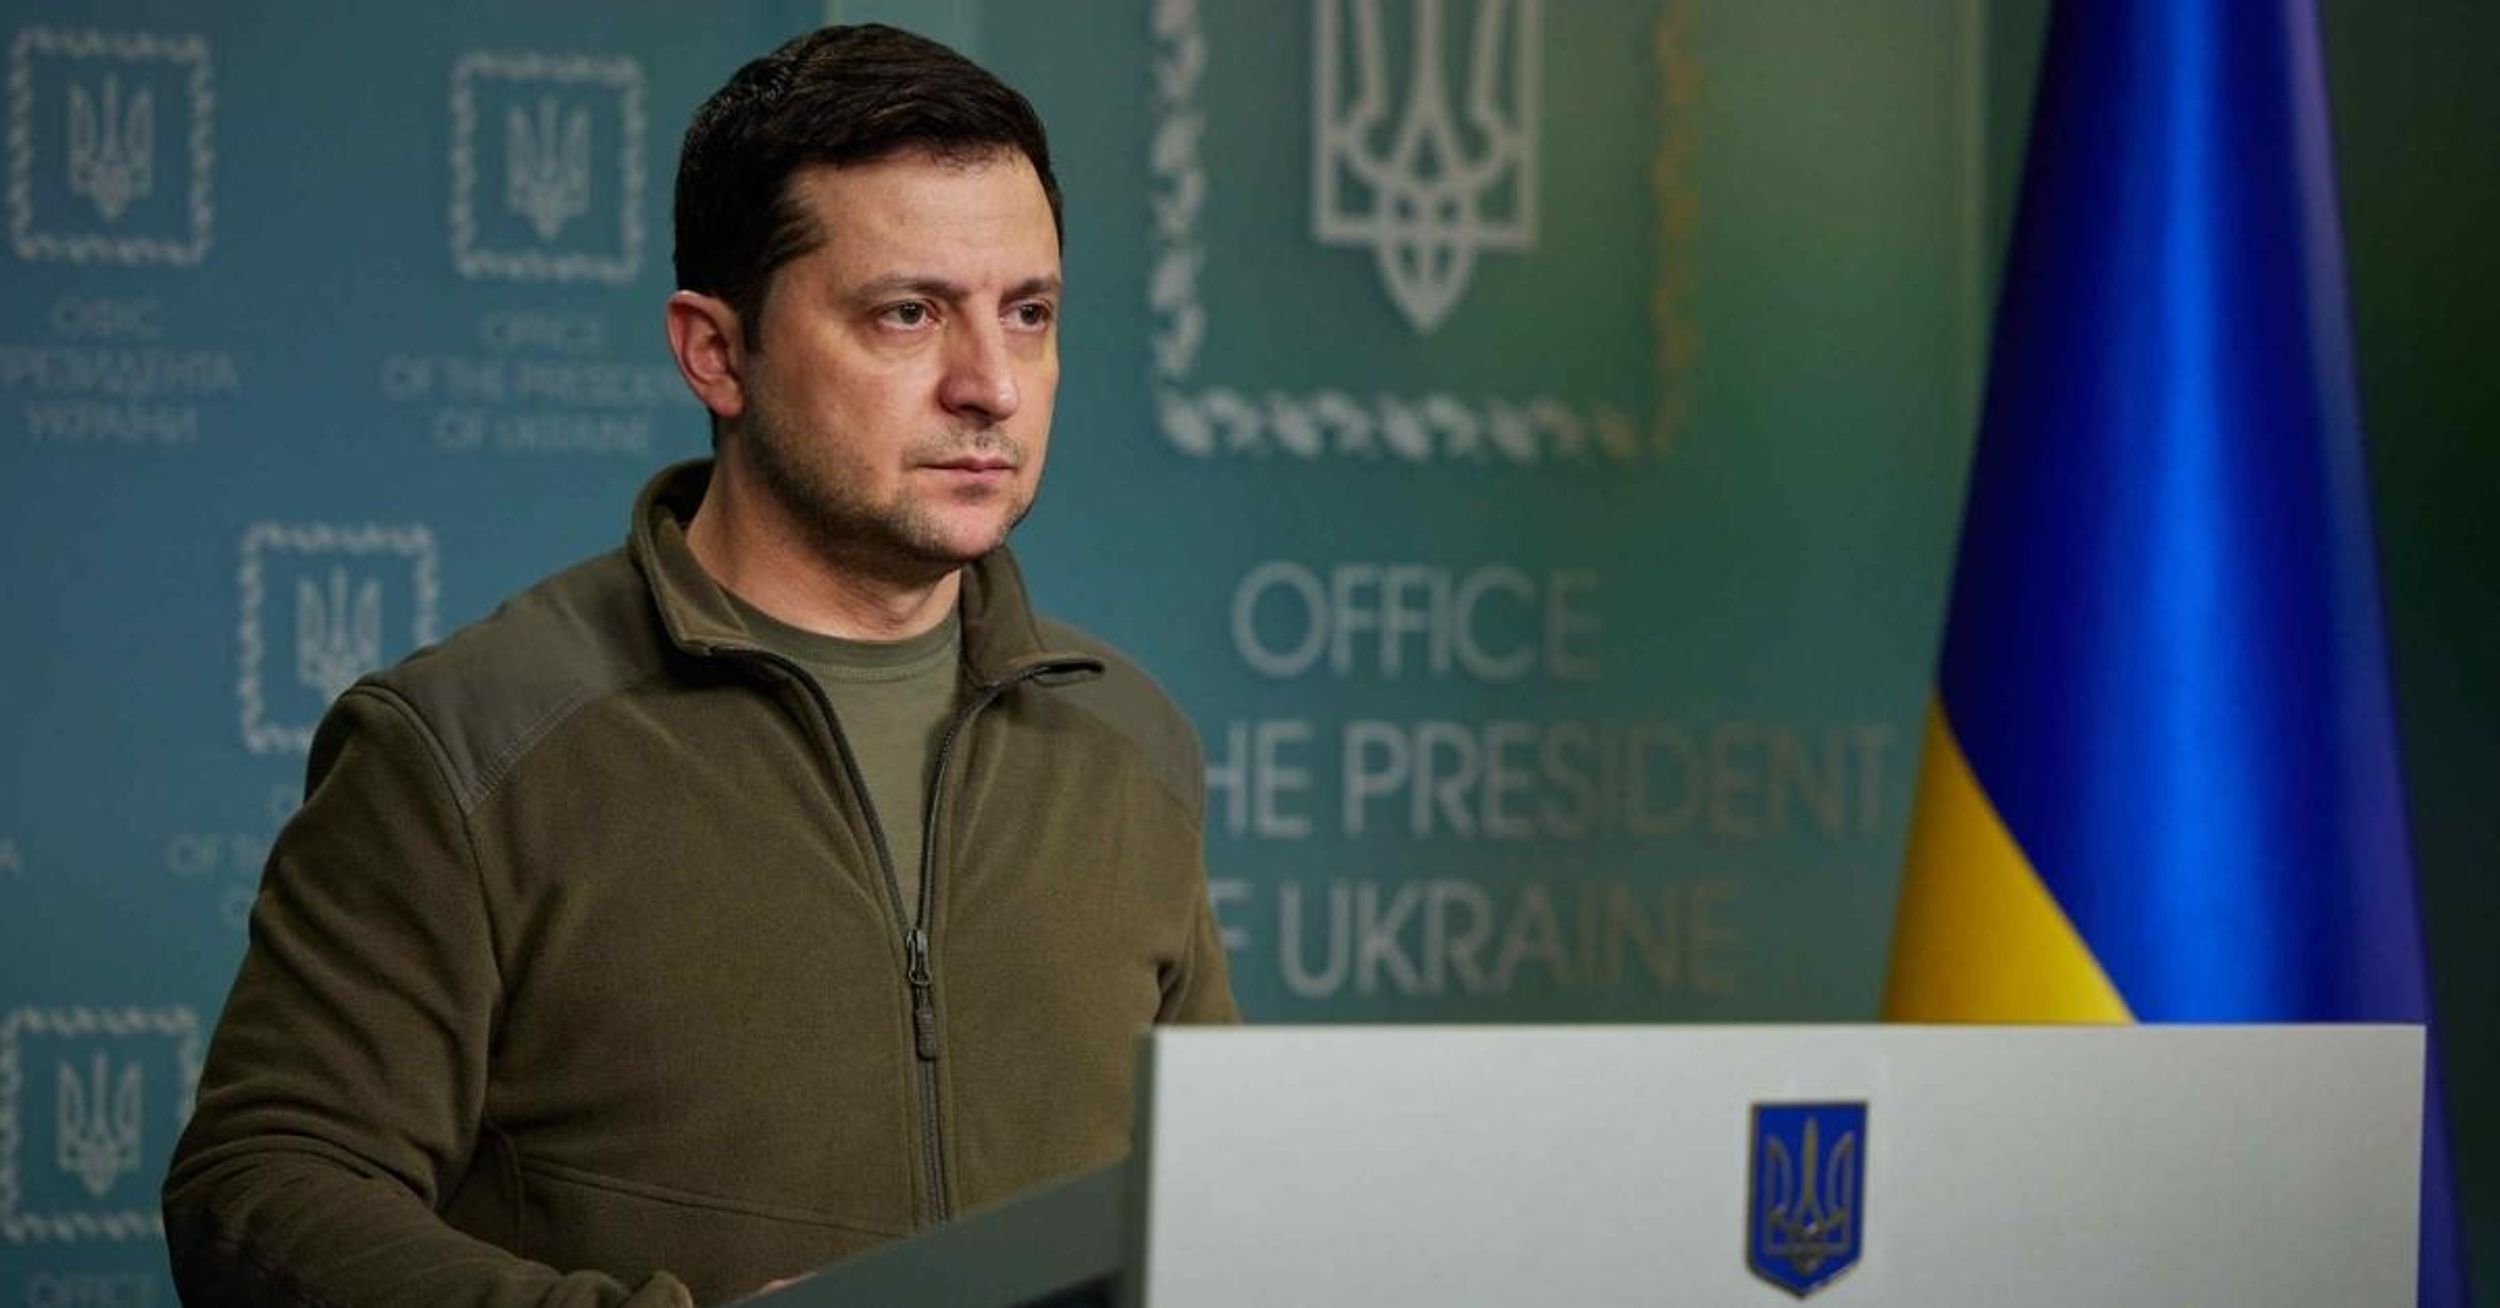 Before And After Photos Of Zelenskyy Show The Toll The War Has Taken On Him Over 41 Days